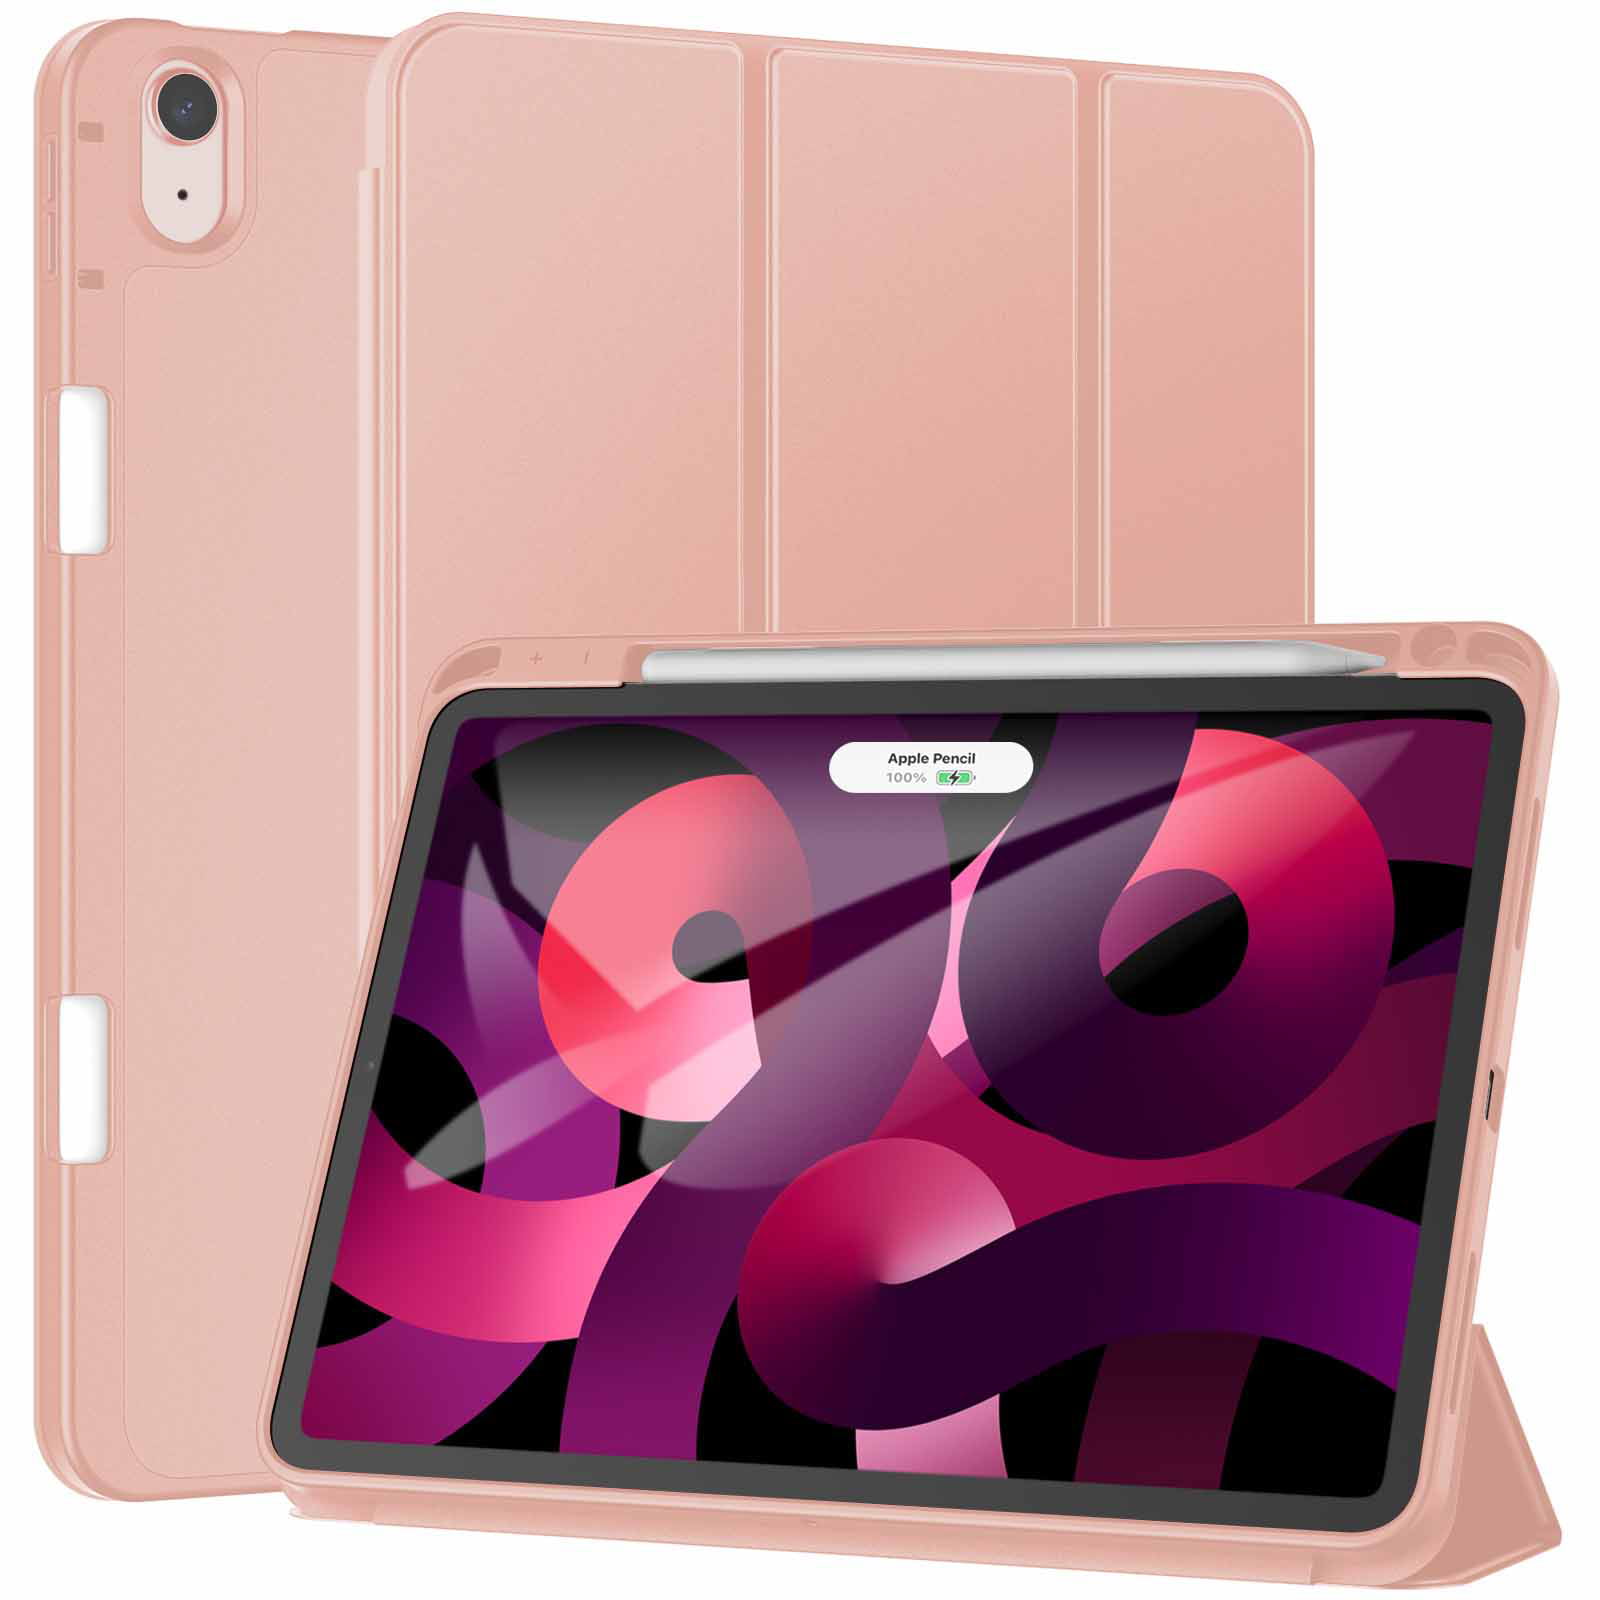 JETech Case for iPad Air 2 (2nd Generation), Smart Cover Auto Wake